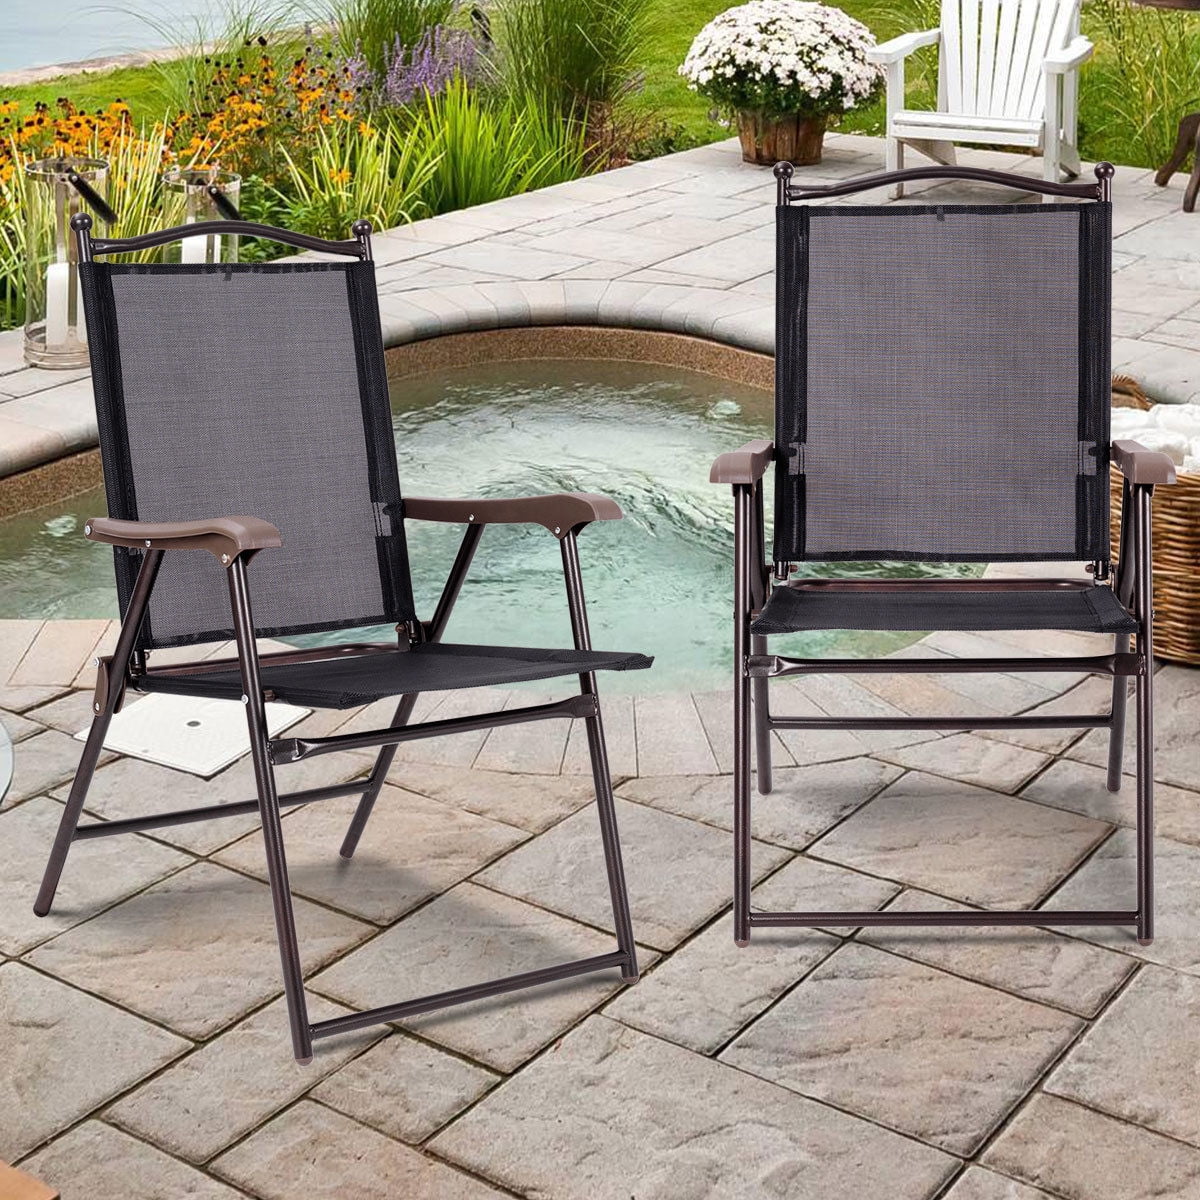 Set of 2 Outdoor Patio Folding Sling Chairs Camping Deck Garden Steel W/ Armrest 